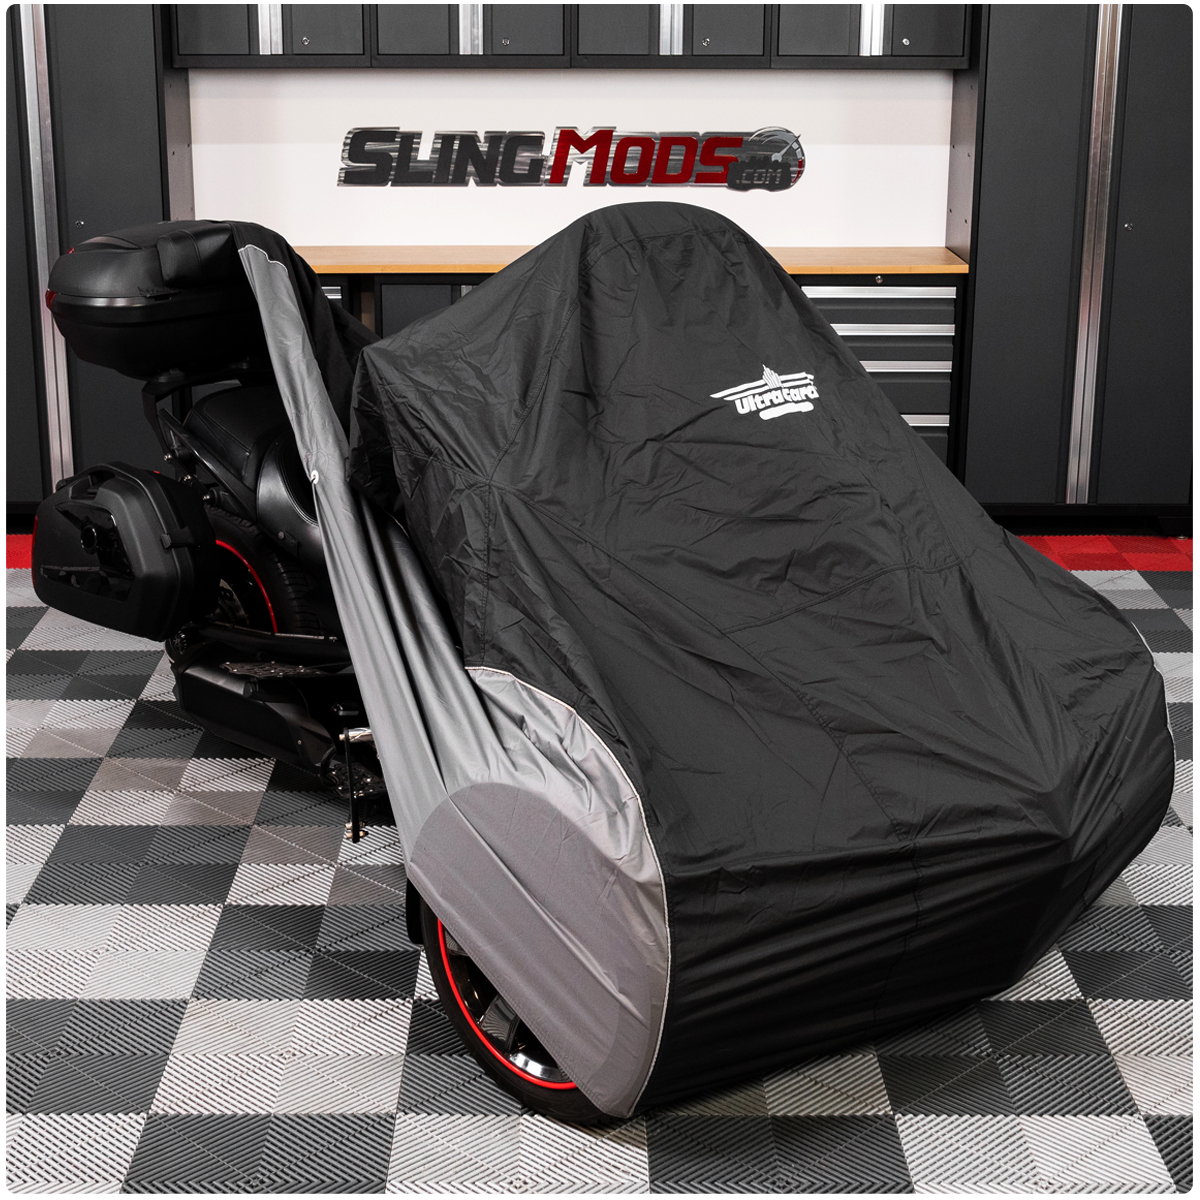 Can-Am Spyder F3/F3s Full Cover for use with our 3-Piece Luggage System by  SpyderExtras